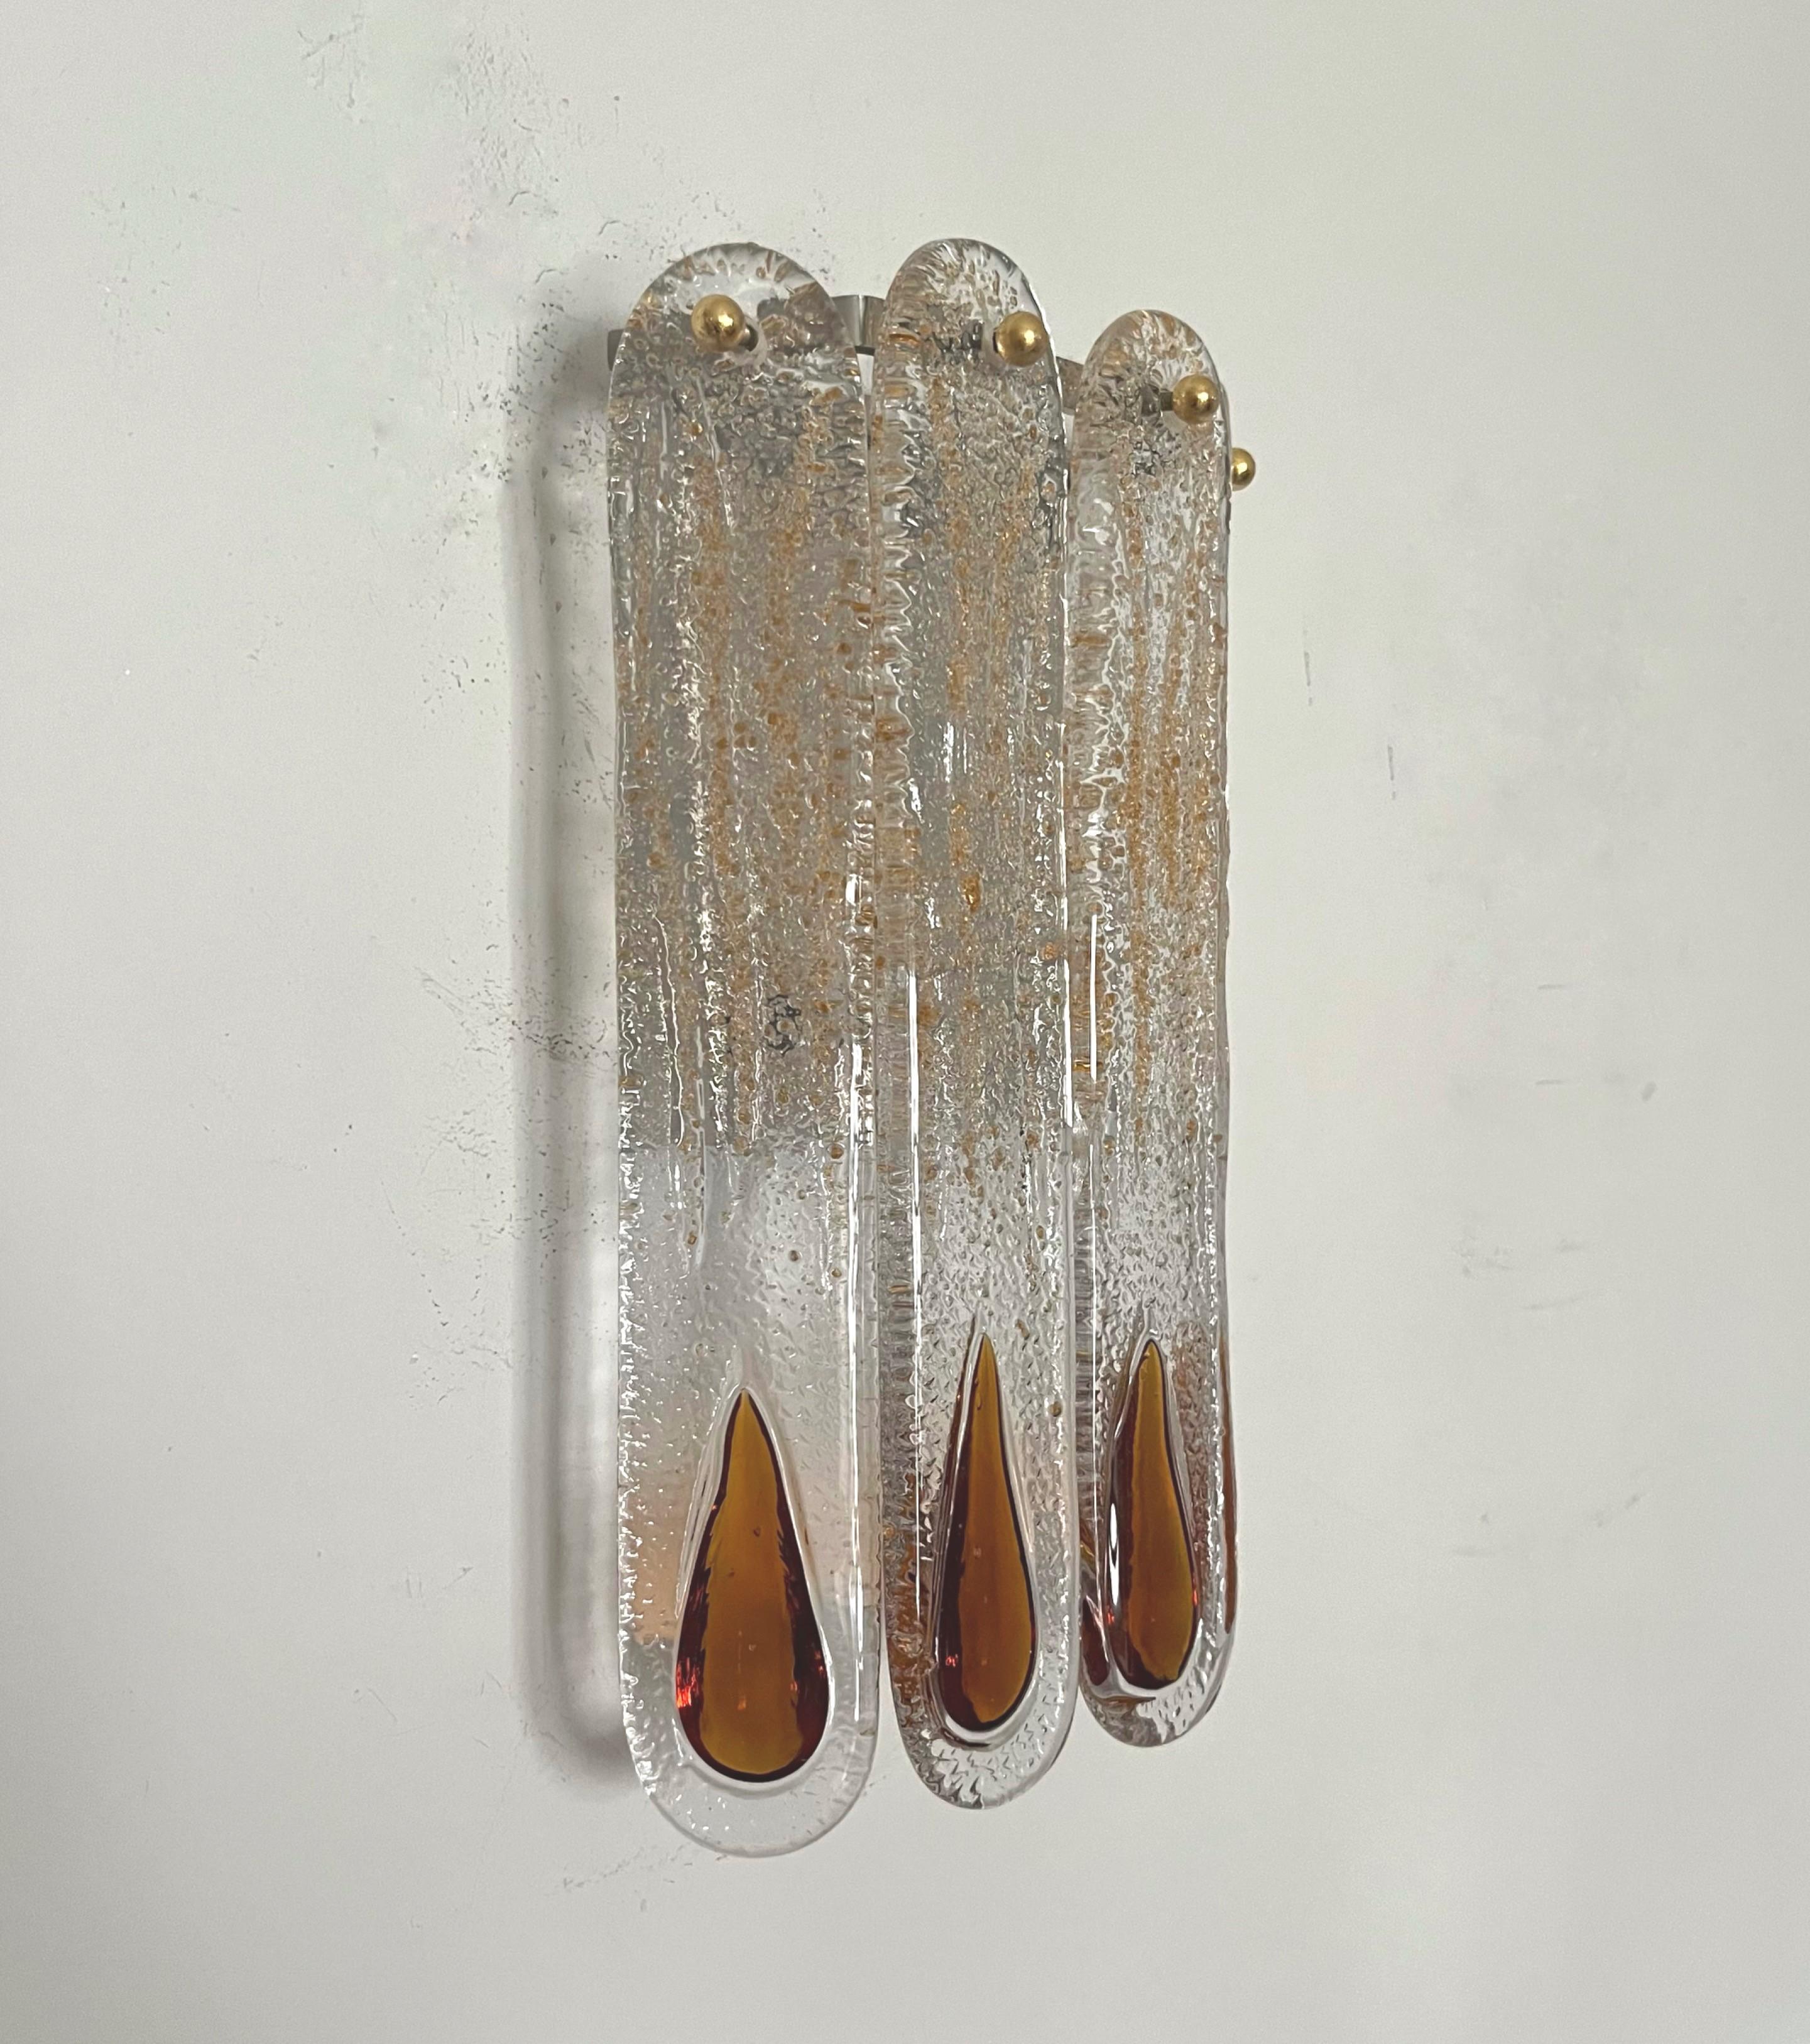 Beautiful and lovely pair of Italian murano glass wall sconces from 1970s. These fixtures were made during the 1970s in Italy by Mazzega.
Mazzega lie in the noble Venetian glassworking tradition; the firm was founded Angelo Vittorio Mazzega in